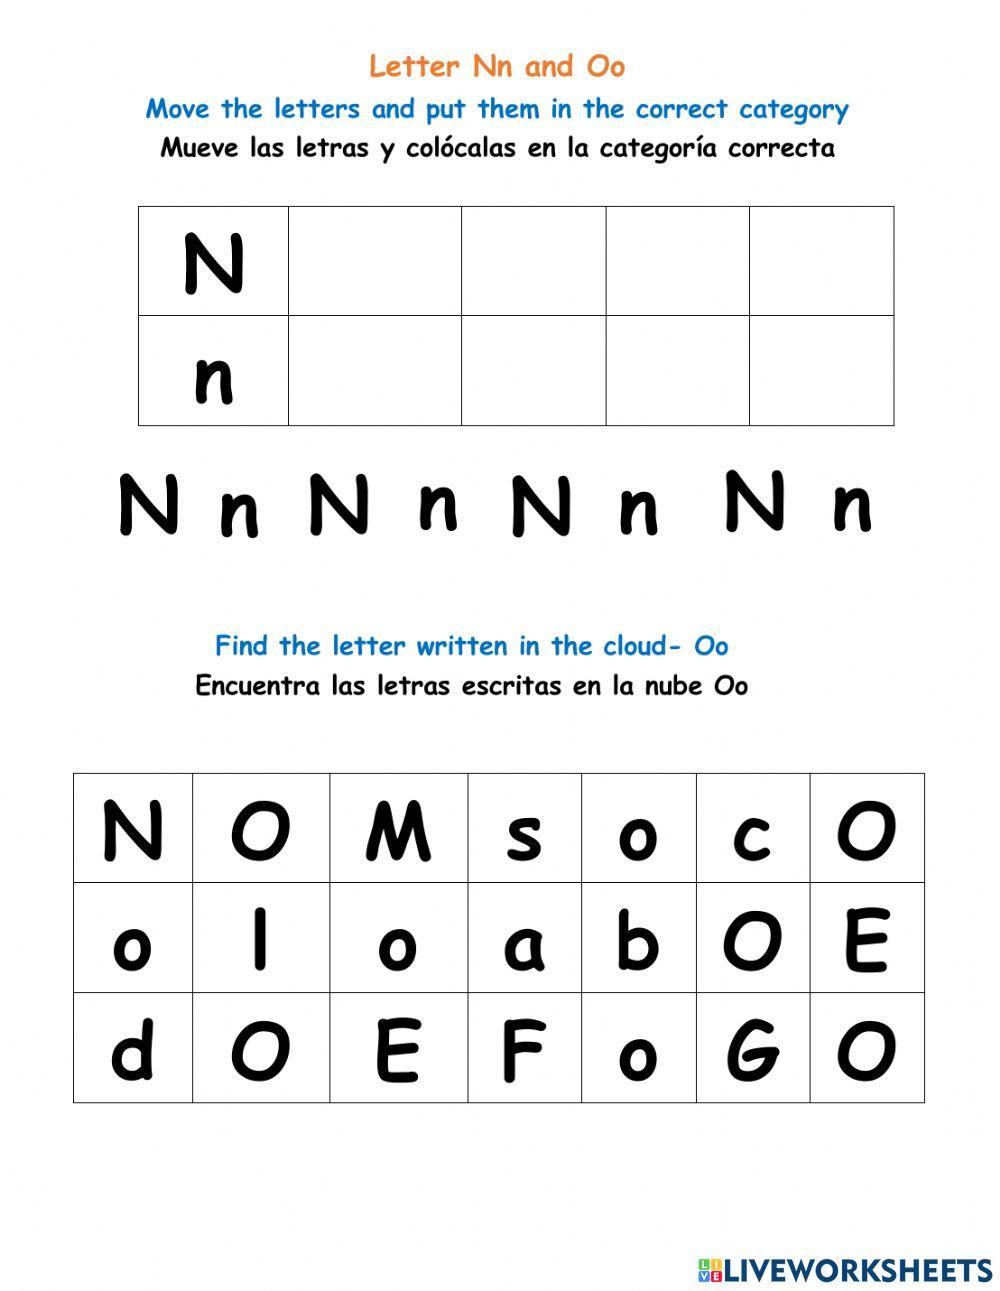 Letter Nn and Oo